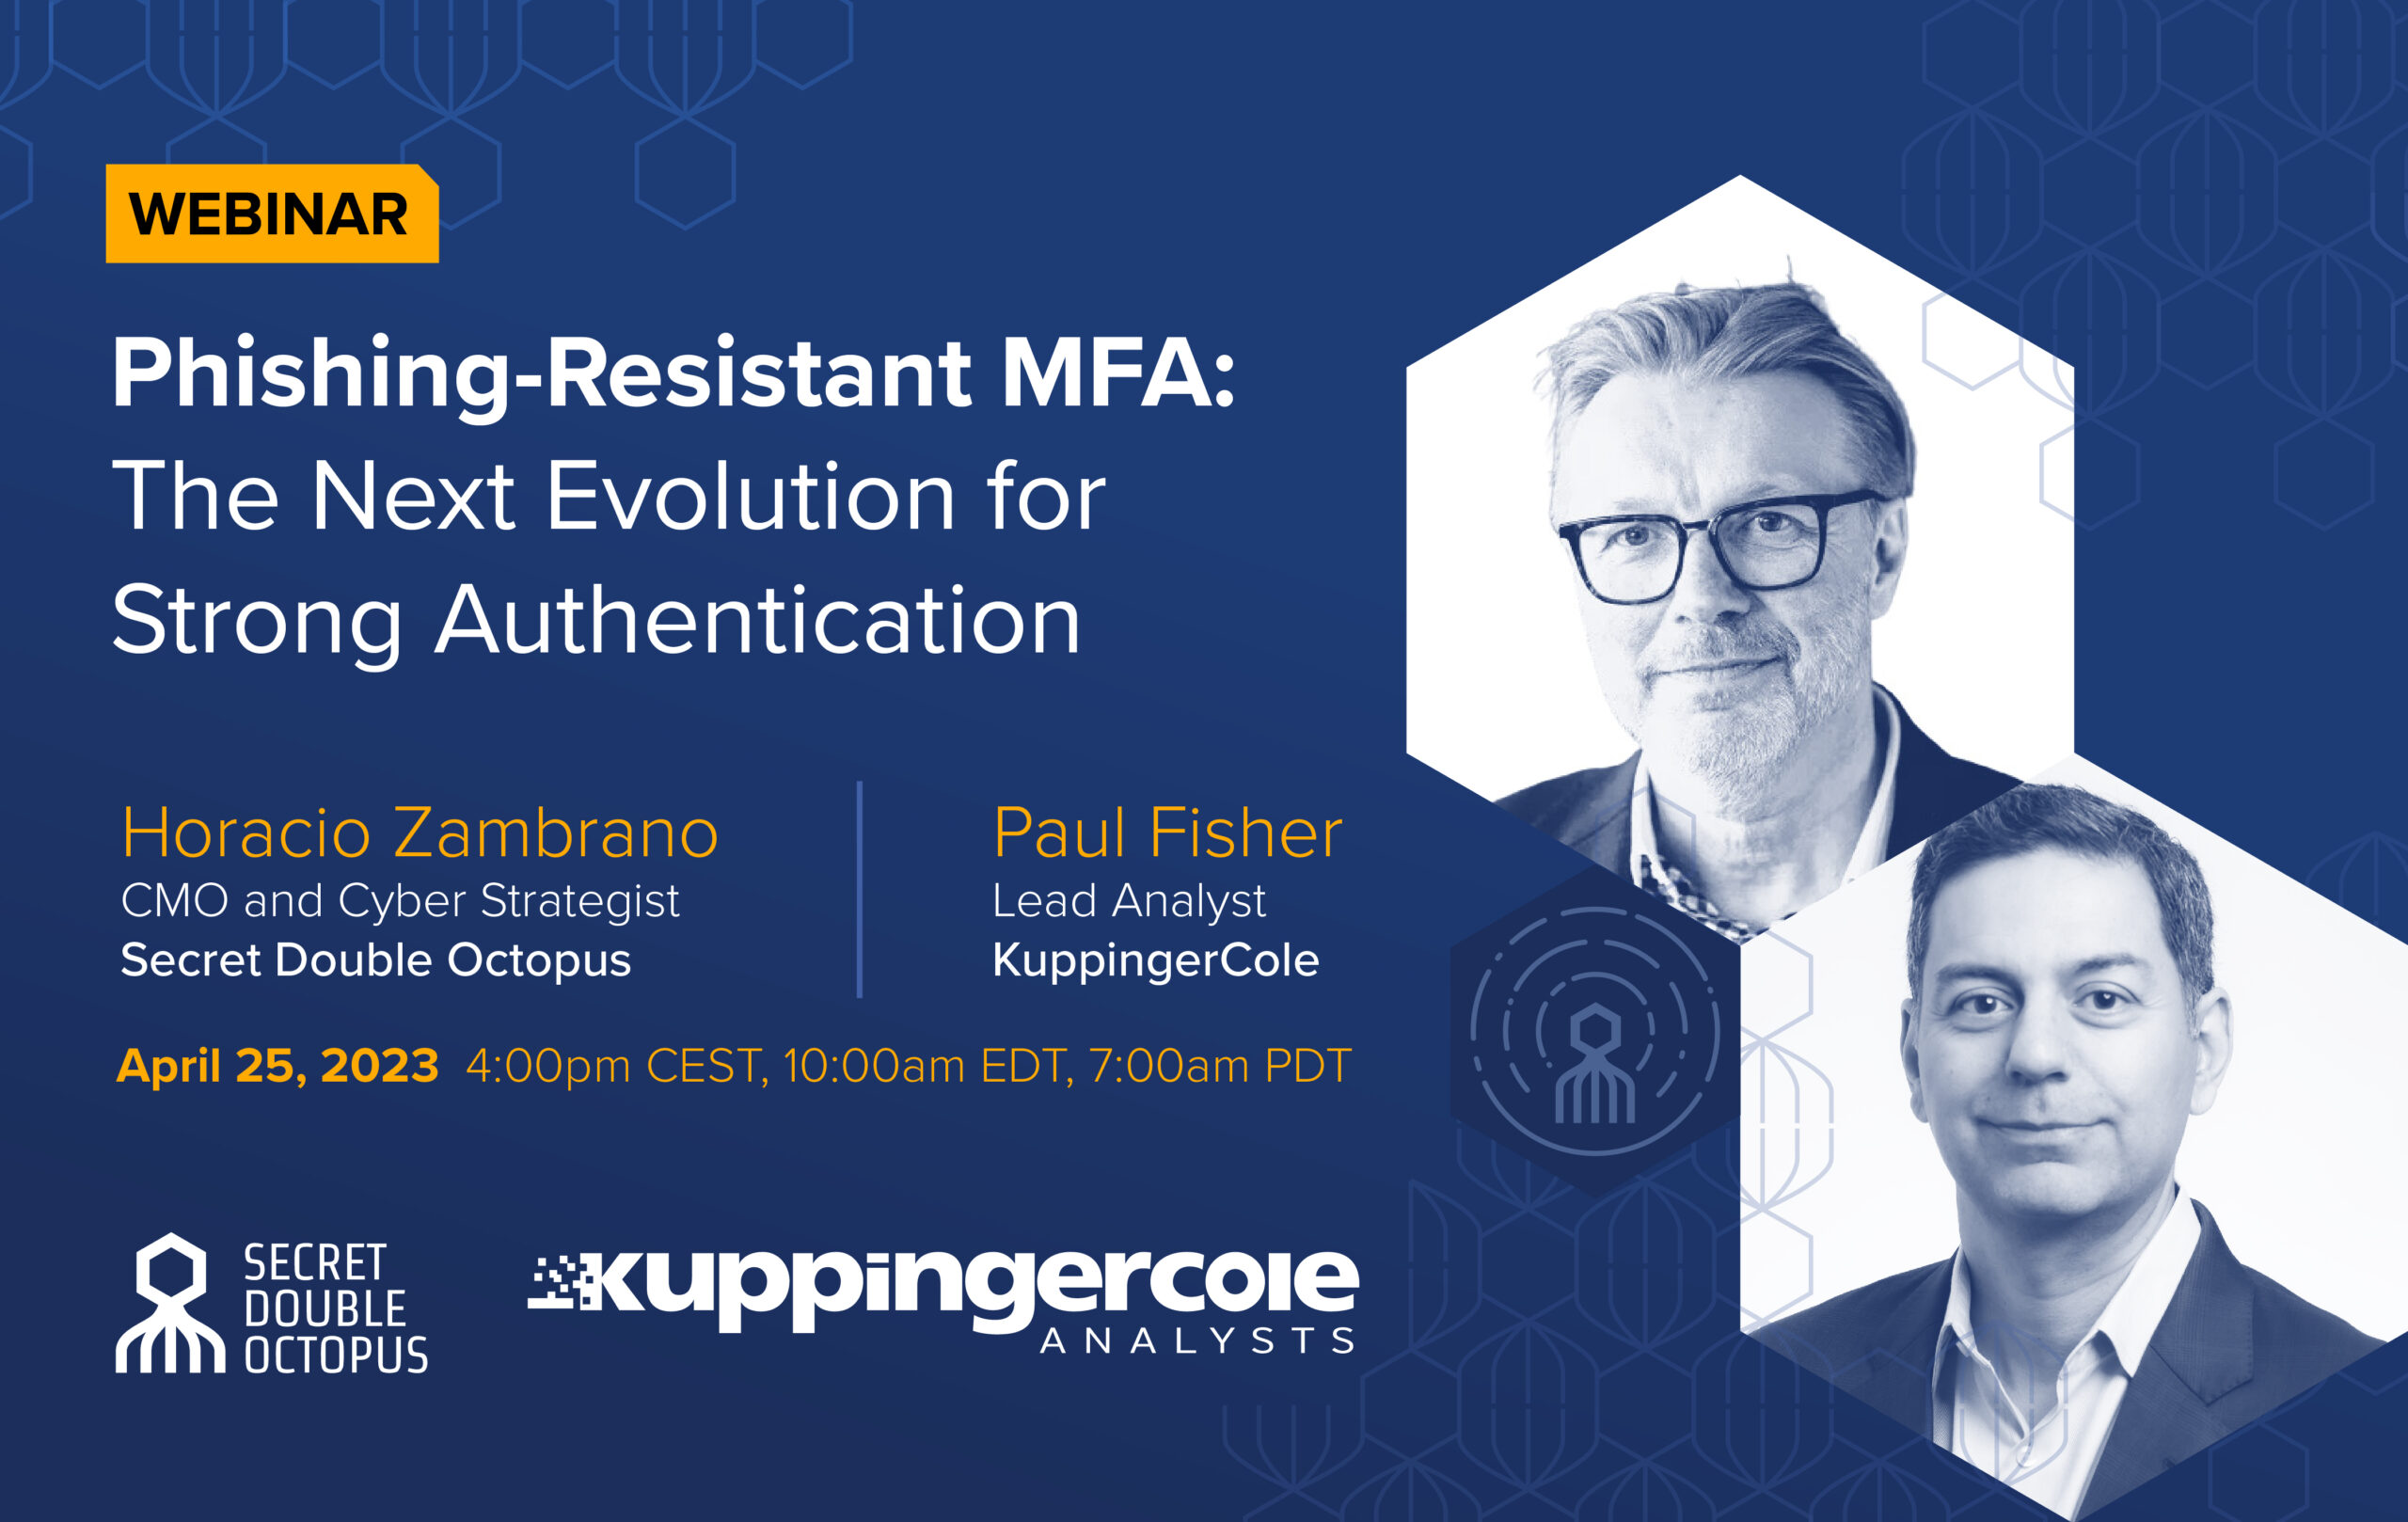 Phishing-Resistant MFA: The Next Evolution for Strong Authentication